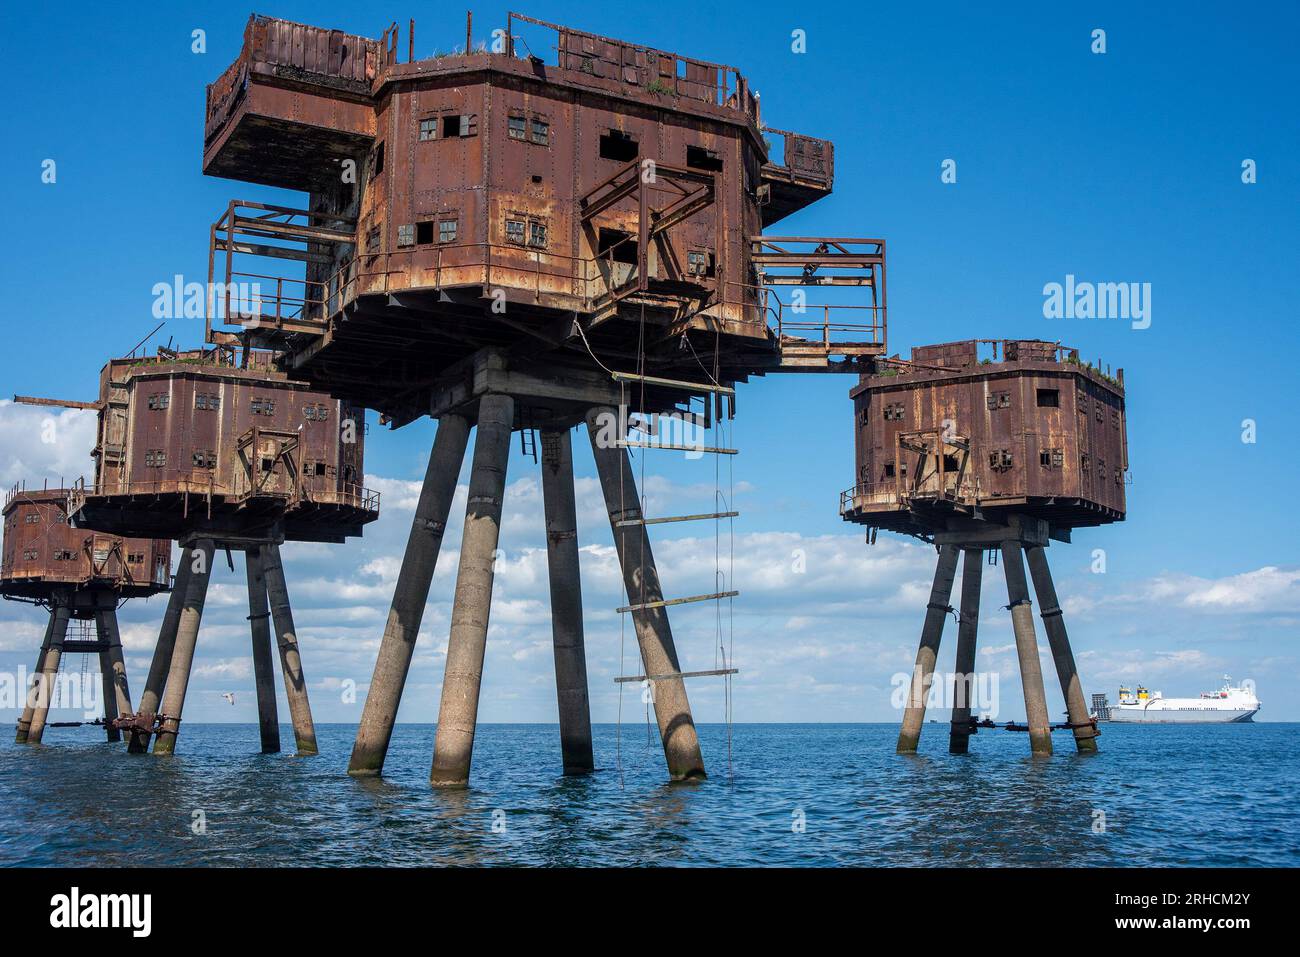 The Maunsell Forts seen with very serious structural defects and many of their parts fallen into the sea. Nowadays only the seagulls nest in them. A ferry boat is visible at the distance as this water is not safe for boating. The Maunsell Forts are armed towers built at the Thames and the Mersey Estuaries during the Second World War to defend the United Kingdom. They have been built 1942 - 1943 for anti-aircraft defense and to report to London about the German aircraft. They are all named after the designer Guy Maunsell. Stock Photo